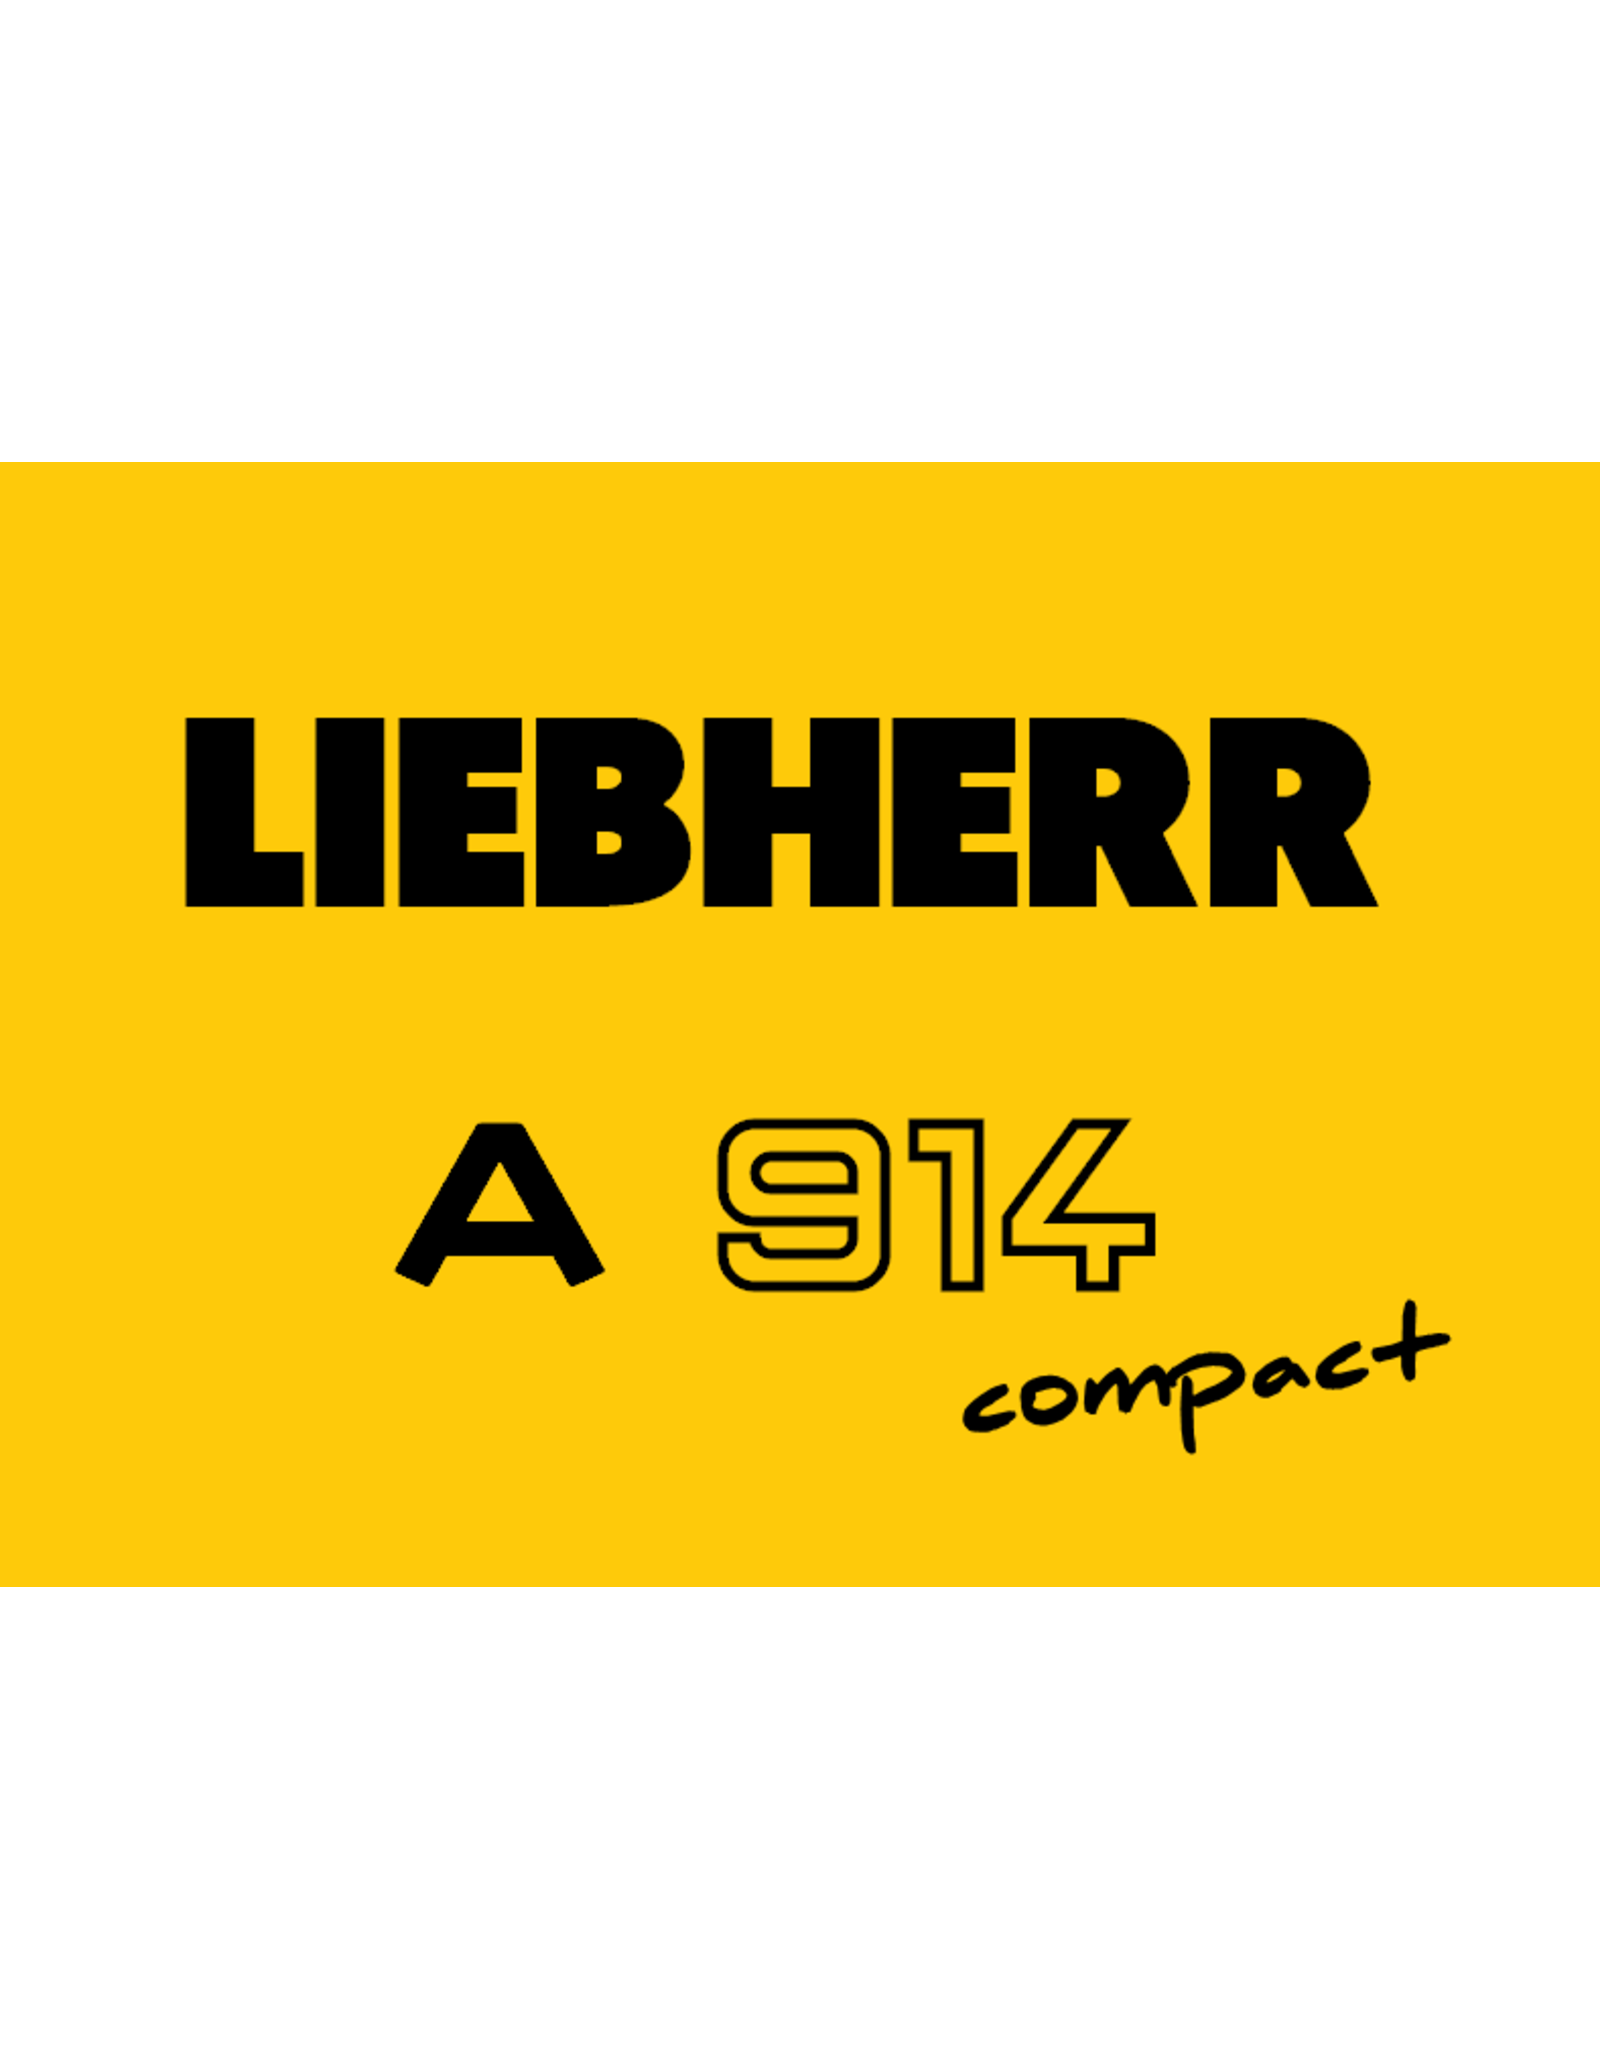 Echle Hartstahl GmbH FOPS for Liebherr A 914 Compact